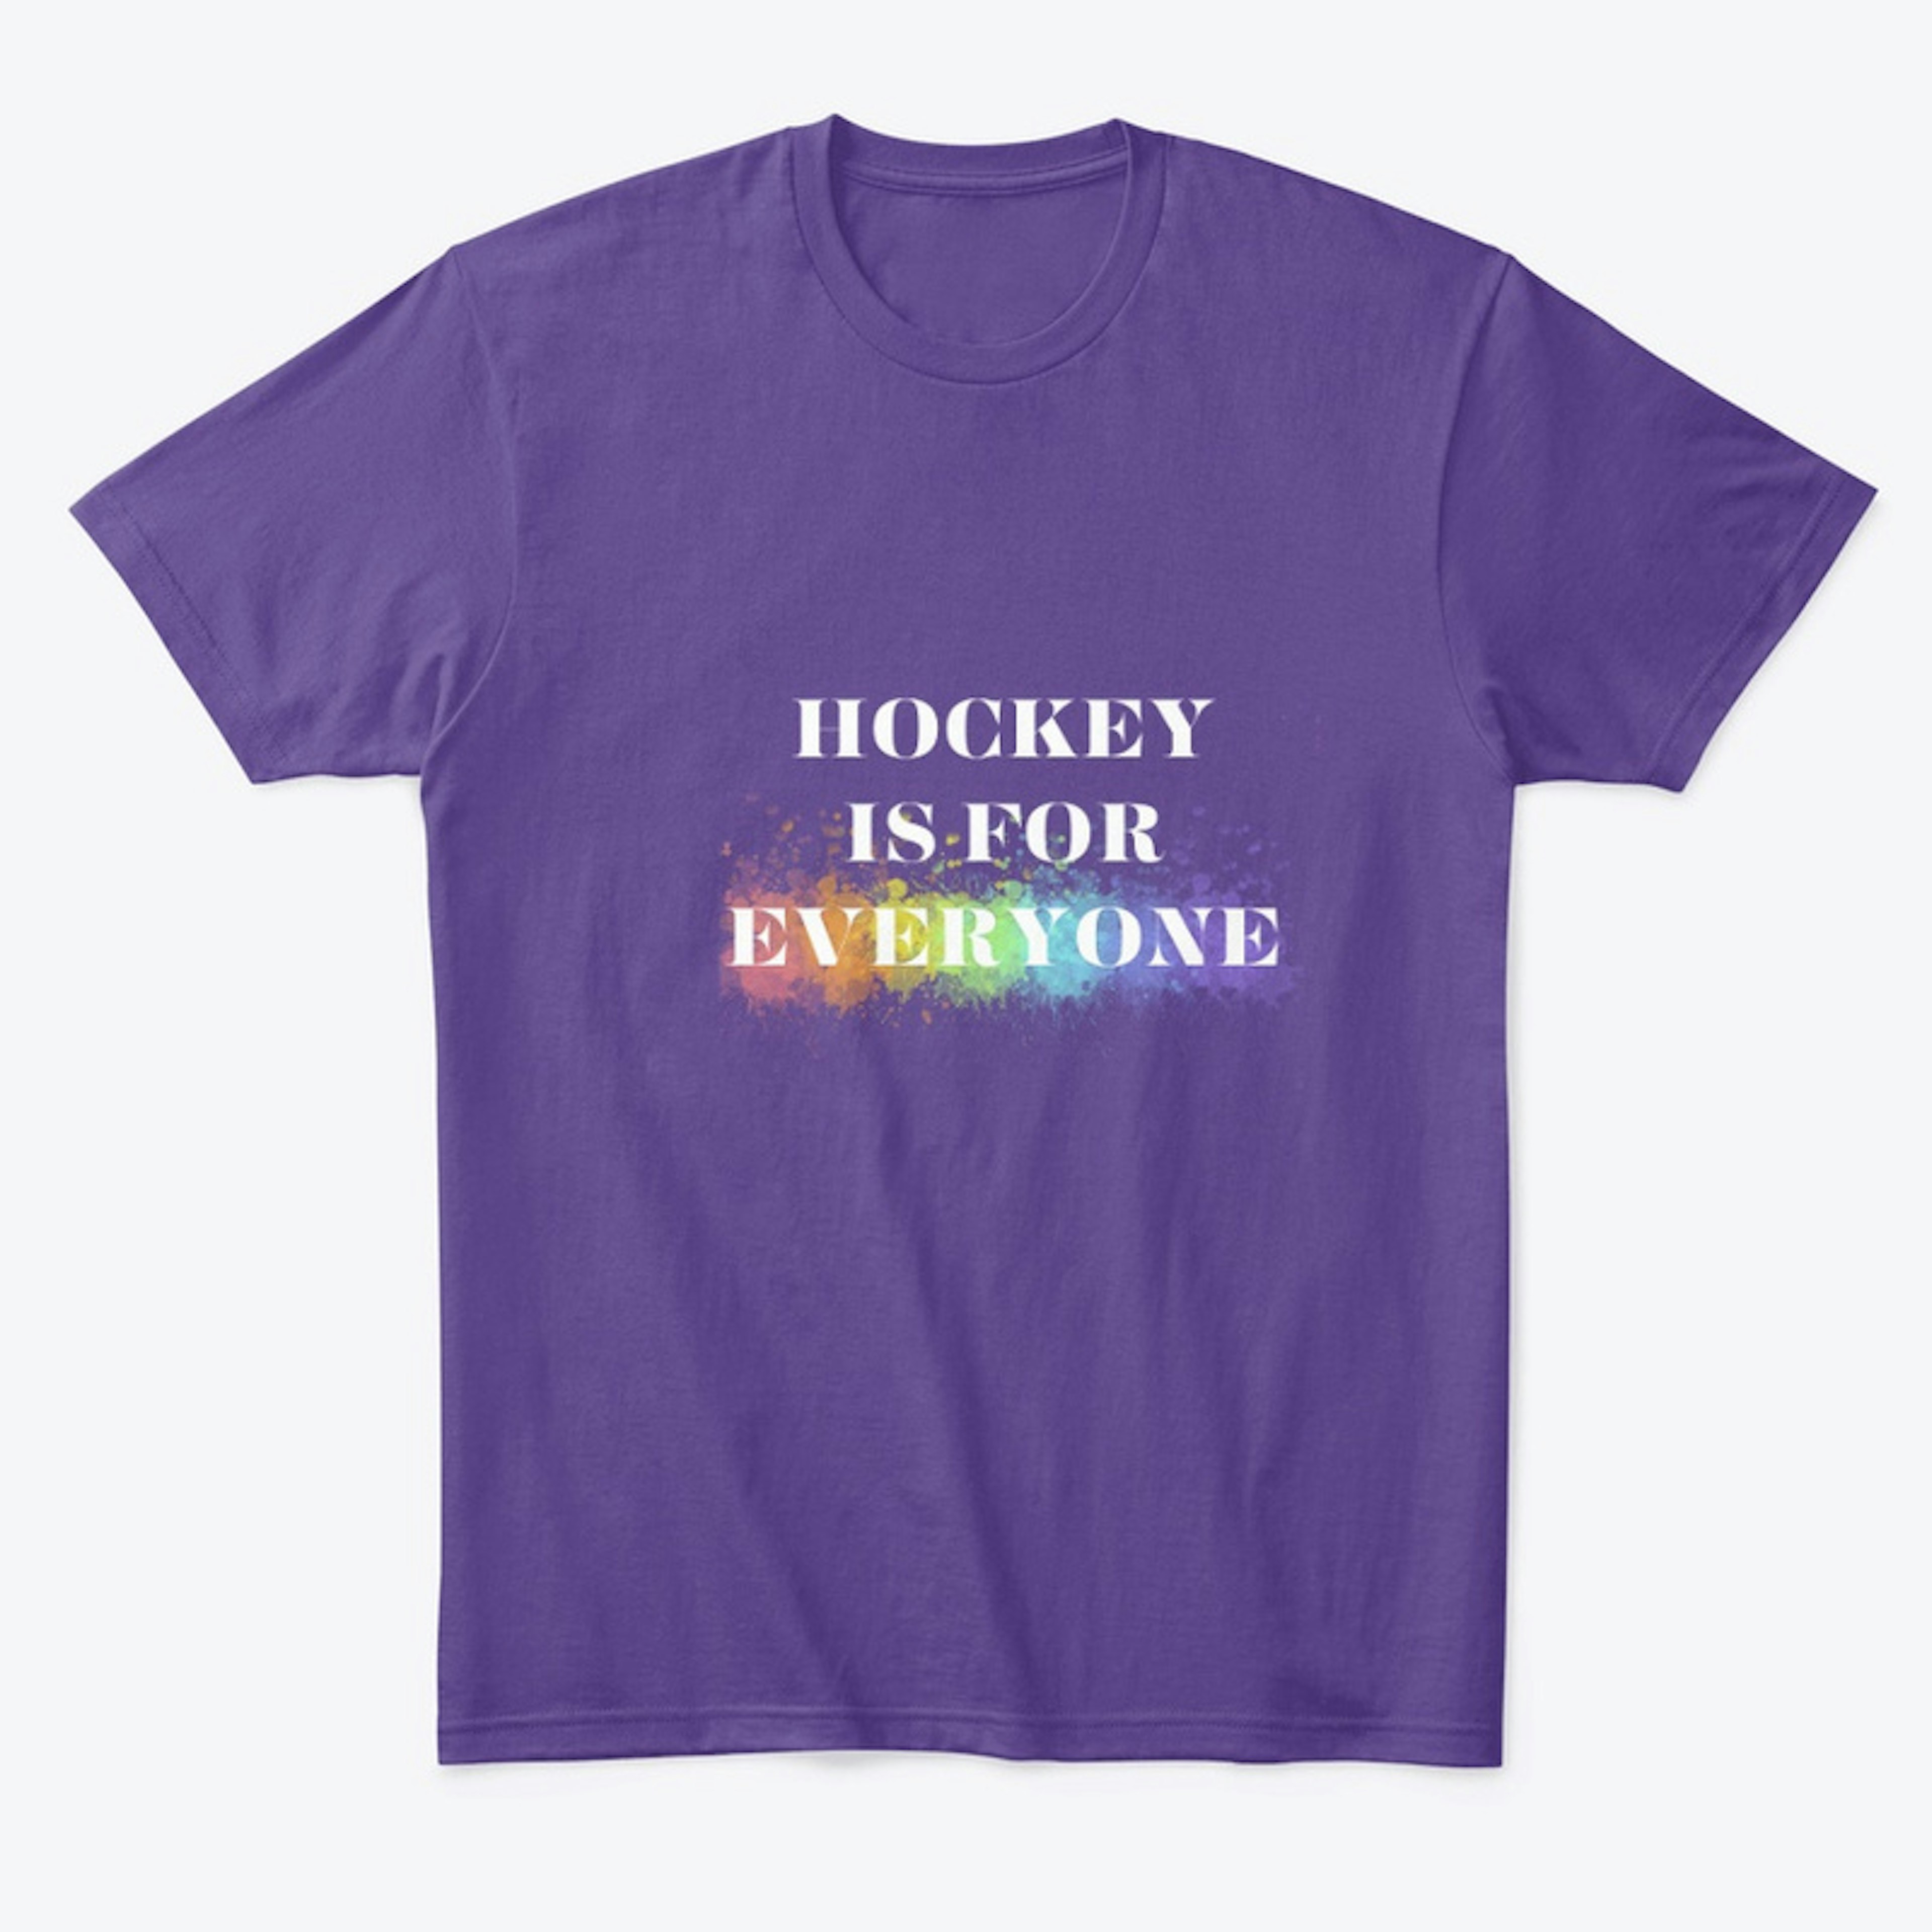 Hockey is for Everyone